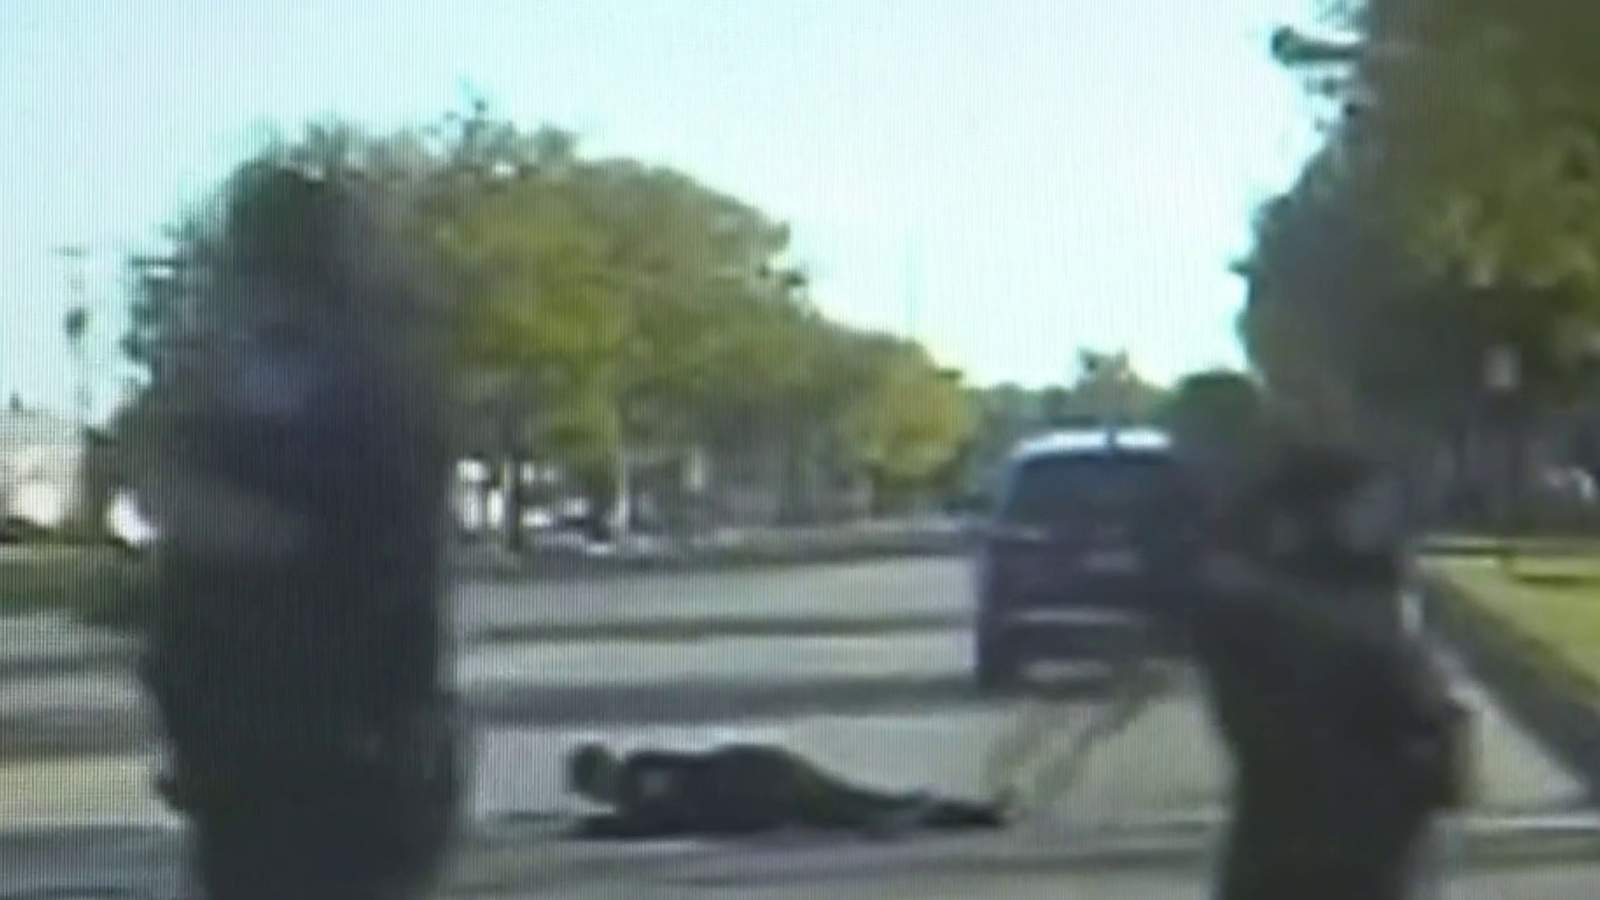 Dashcam footage shows Oak Park police officer being dragged by vehicle during traffic stop